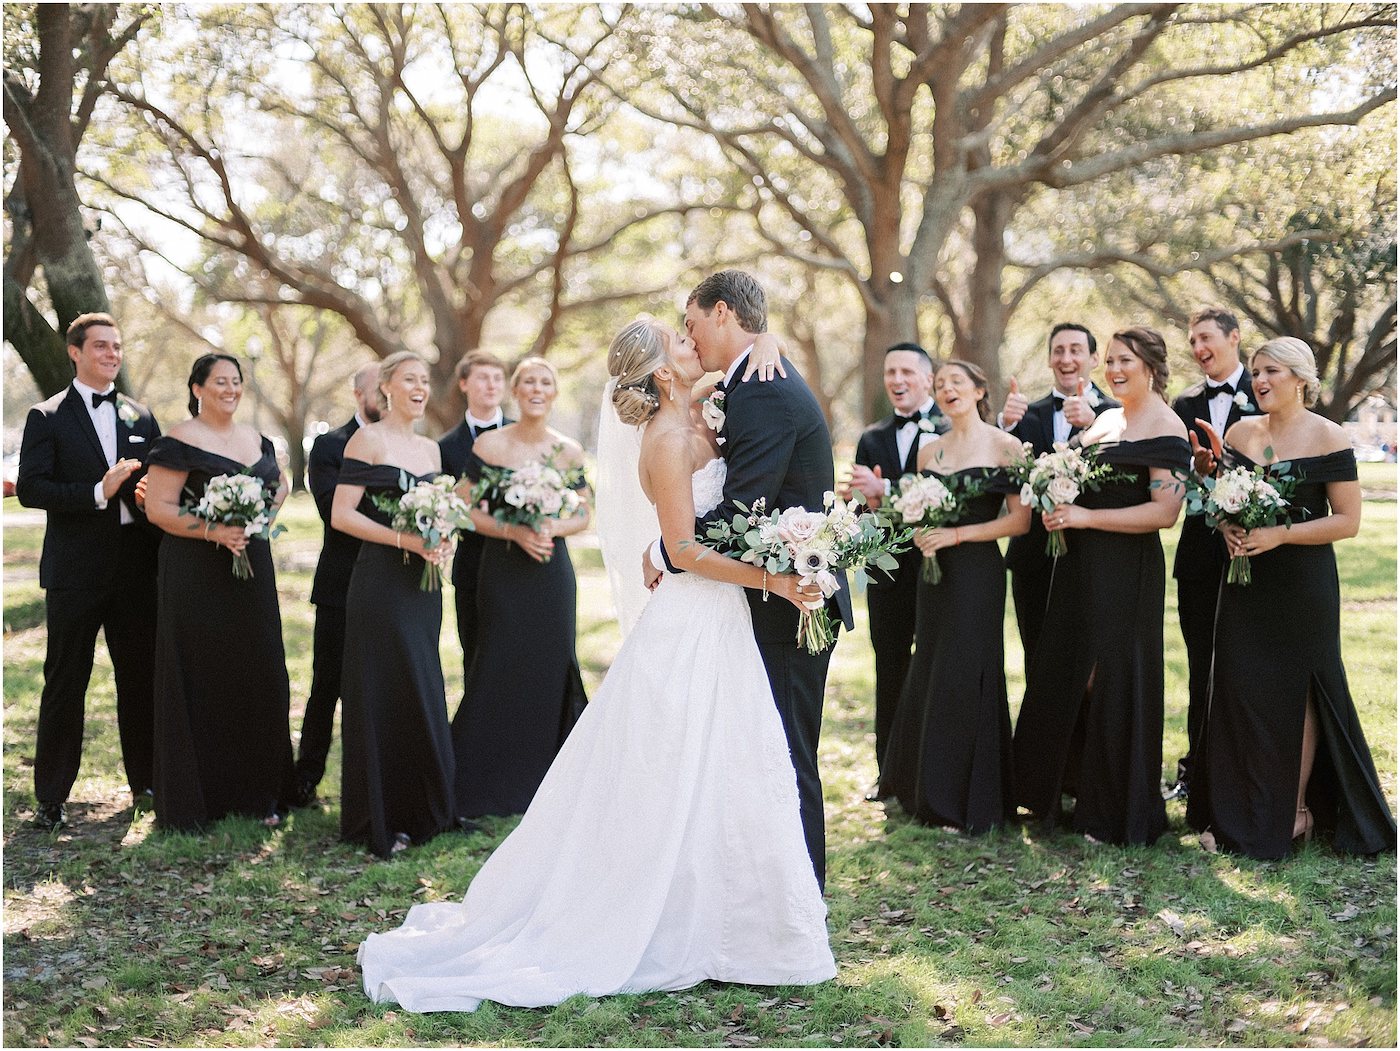 Lace Ballgown Wedding Dress | Wedding Party Outdoor Portraits | Black Long Bridesmaid Dresses with Black and White Anemone and Greenery Bouquets | Groomsmen Classic Black Suit Tuxedo with Bow Tie | Tampa Bridesmaids Dress Store Bella Bridesmaids